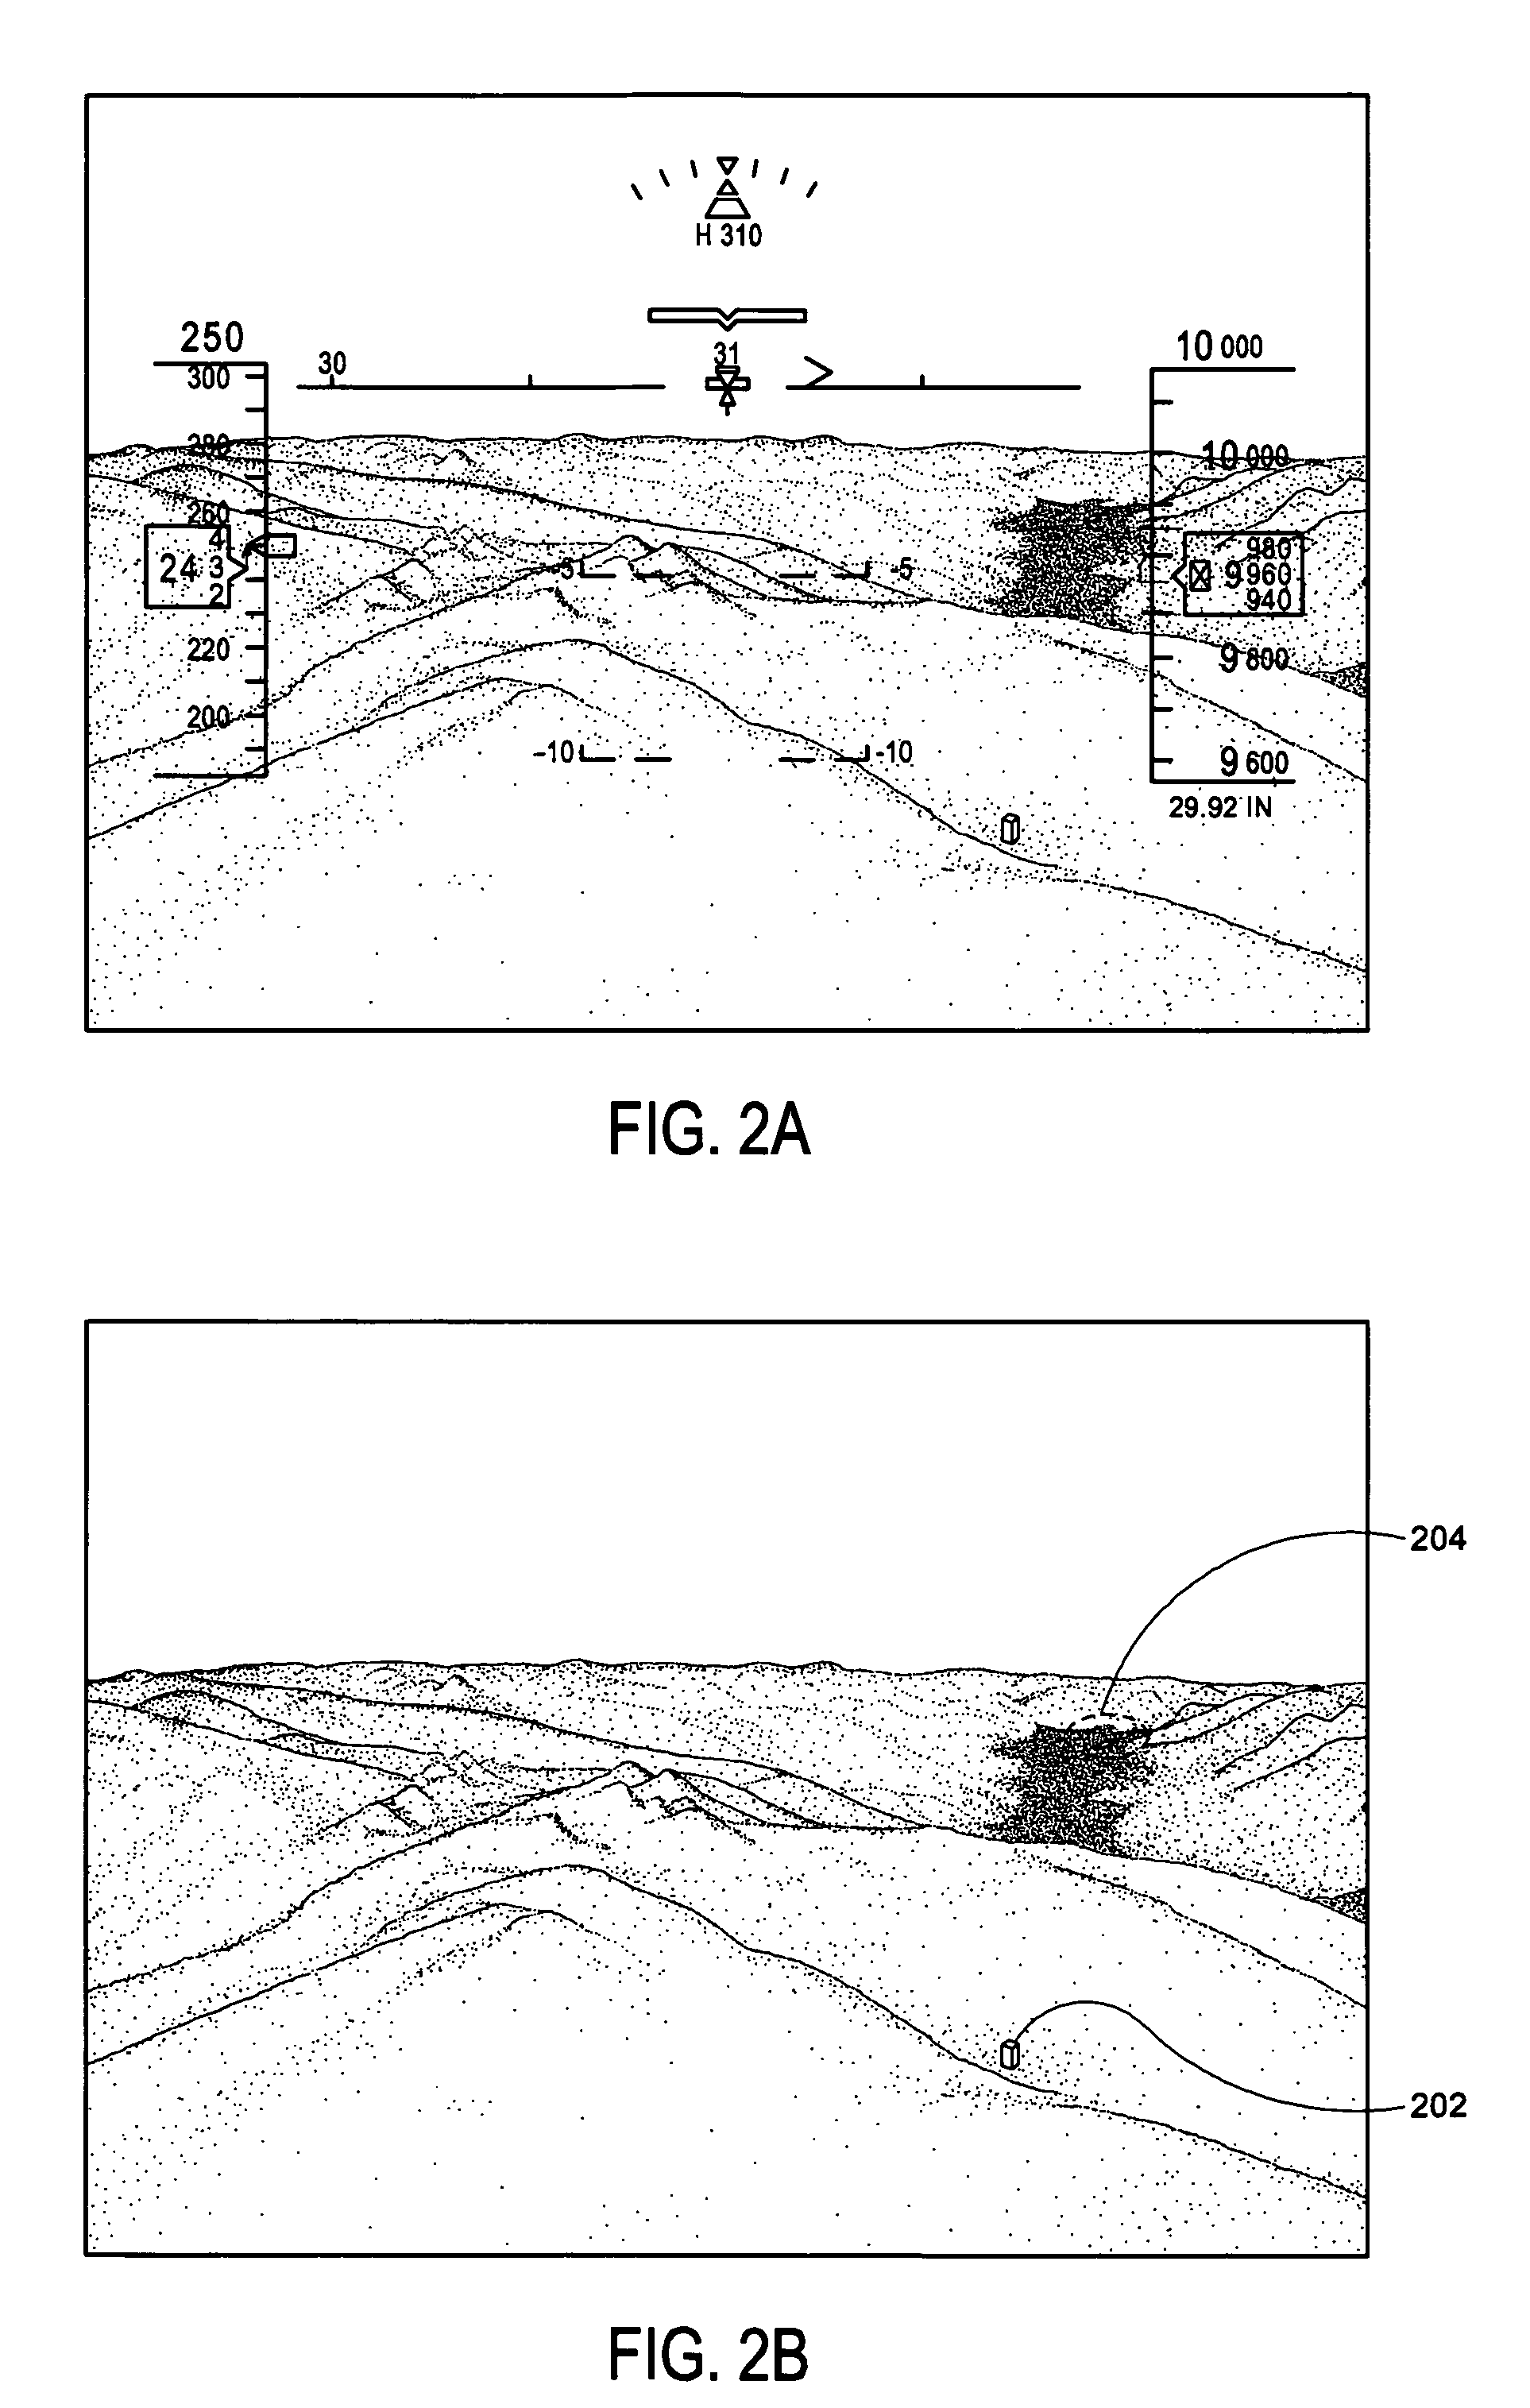 System, apparatus, and method for generating location information on an aircraft display unit using location markers